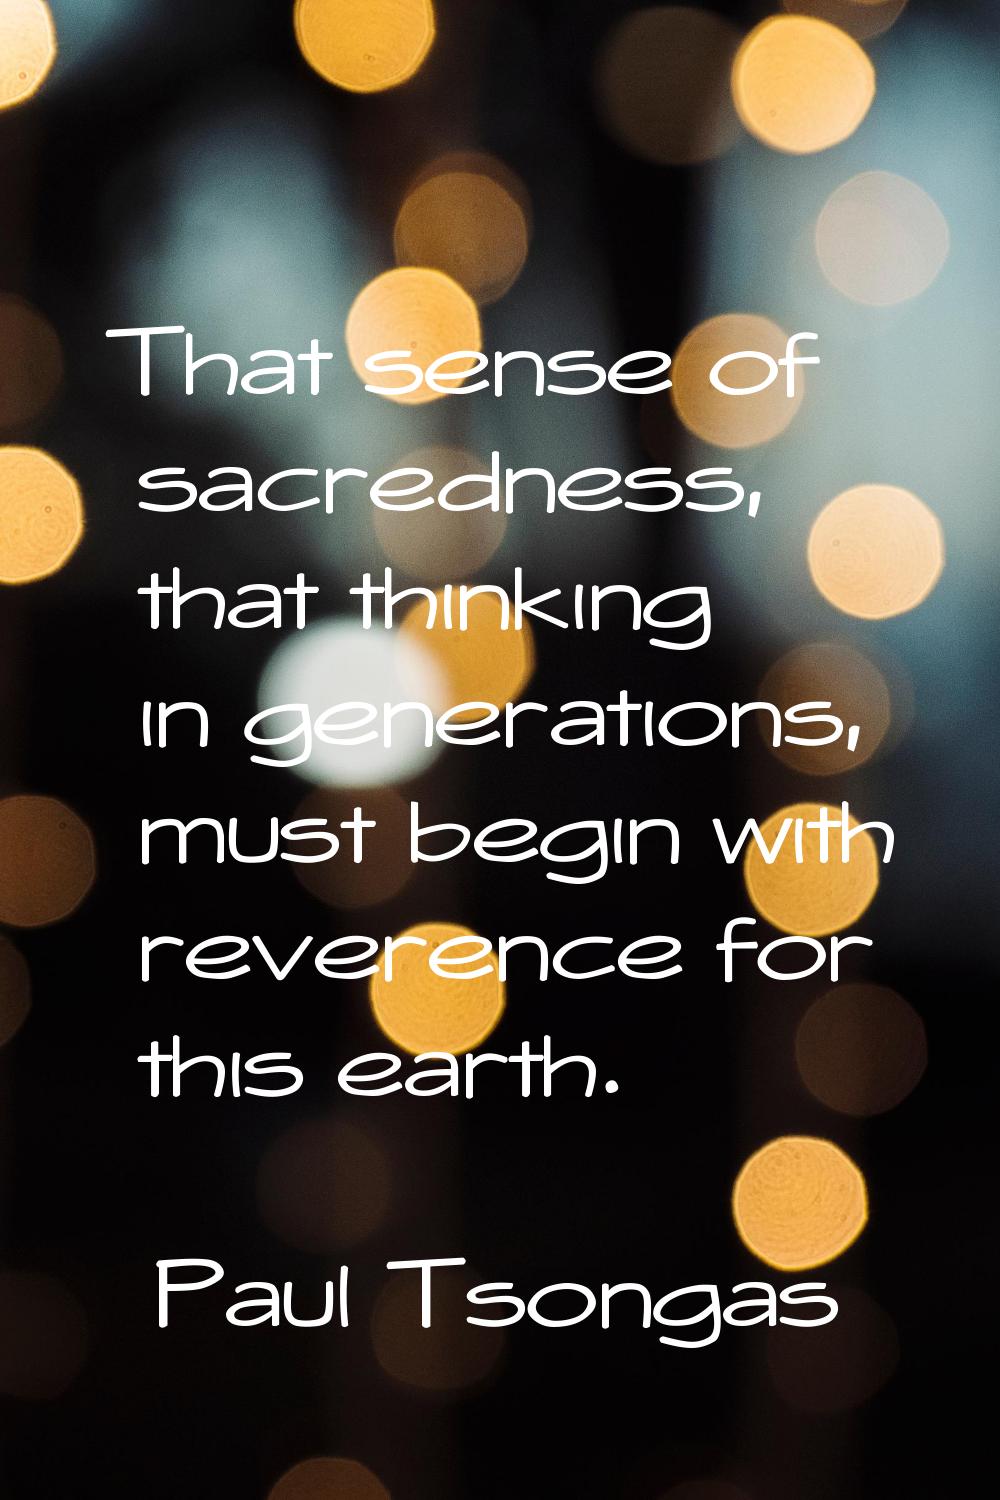 That sense of sacredness, that thinking in generations, must begin with reverence for this earth.